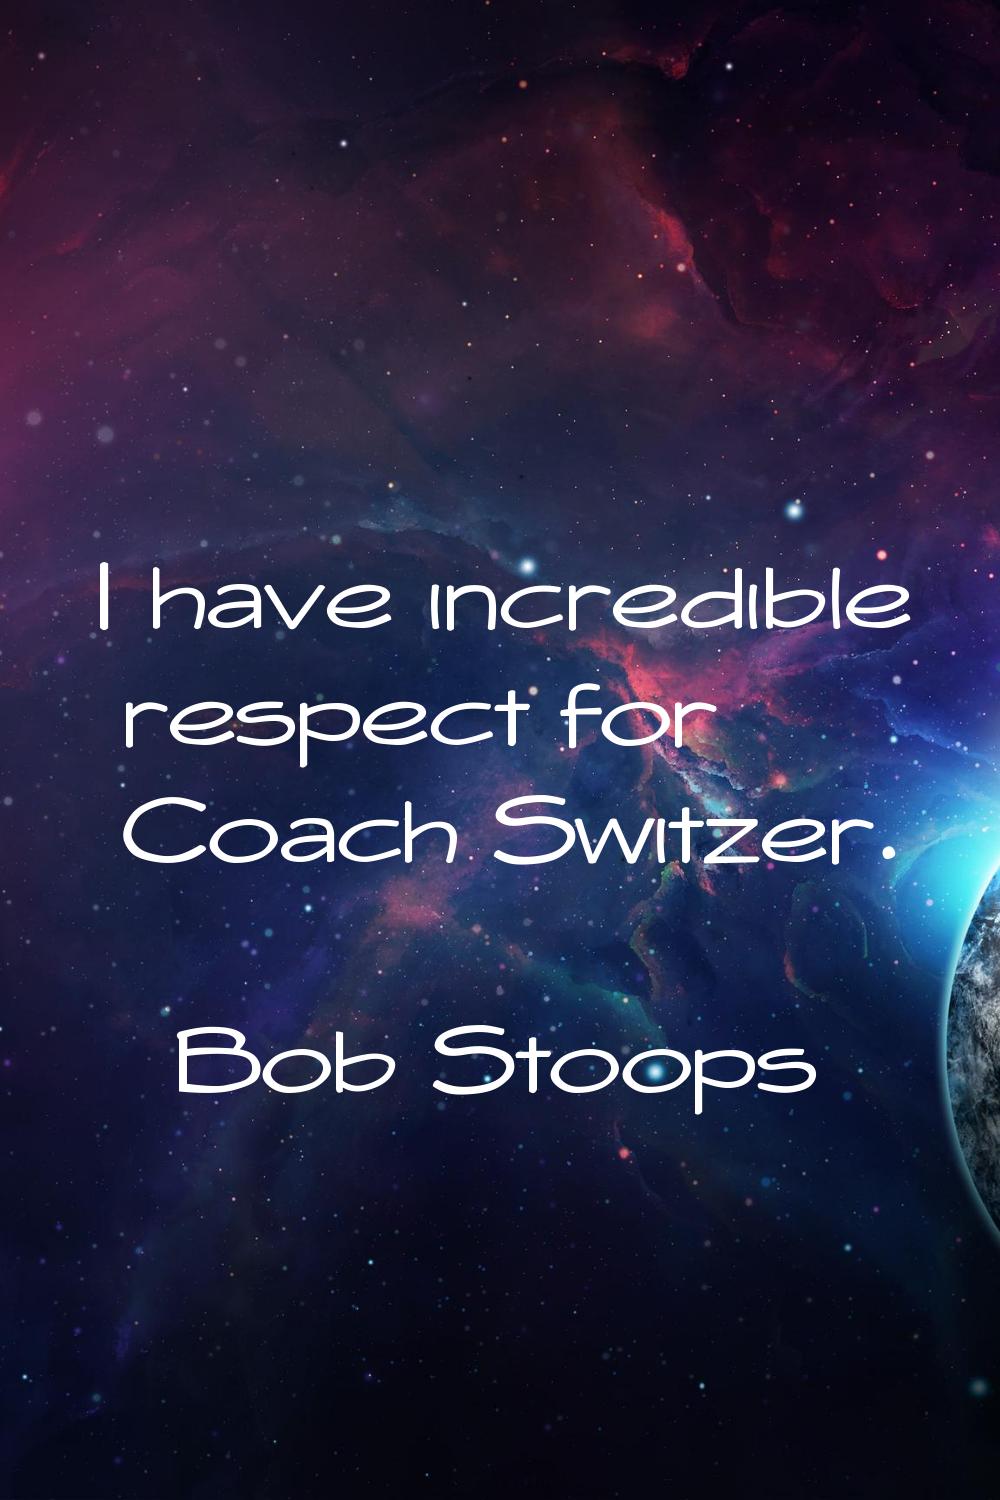 I have incredible respect for Coach Switzer.